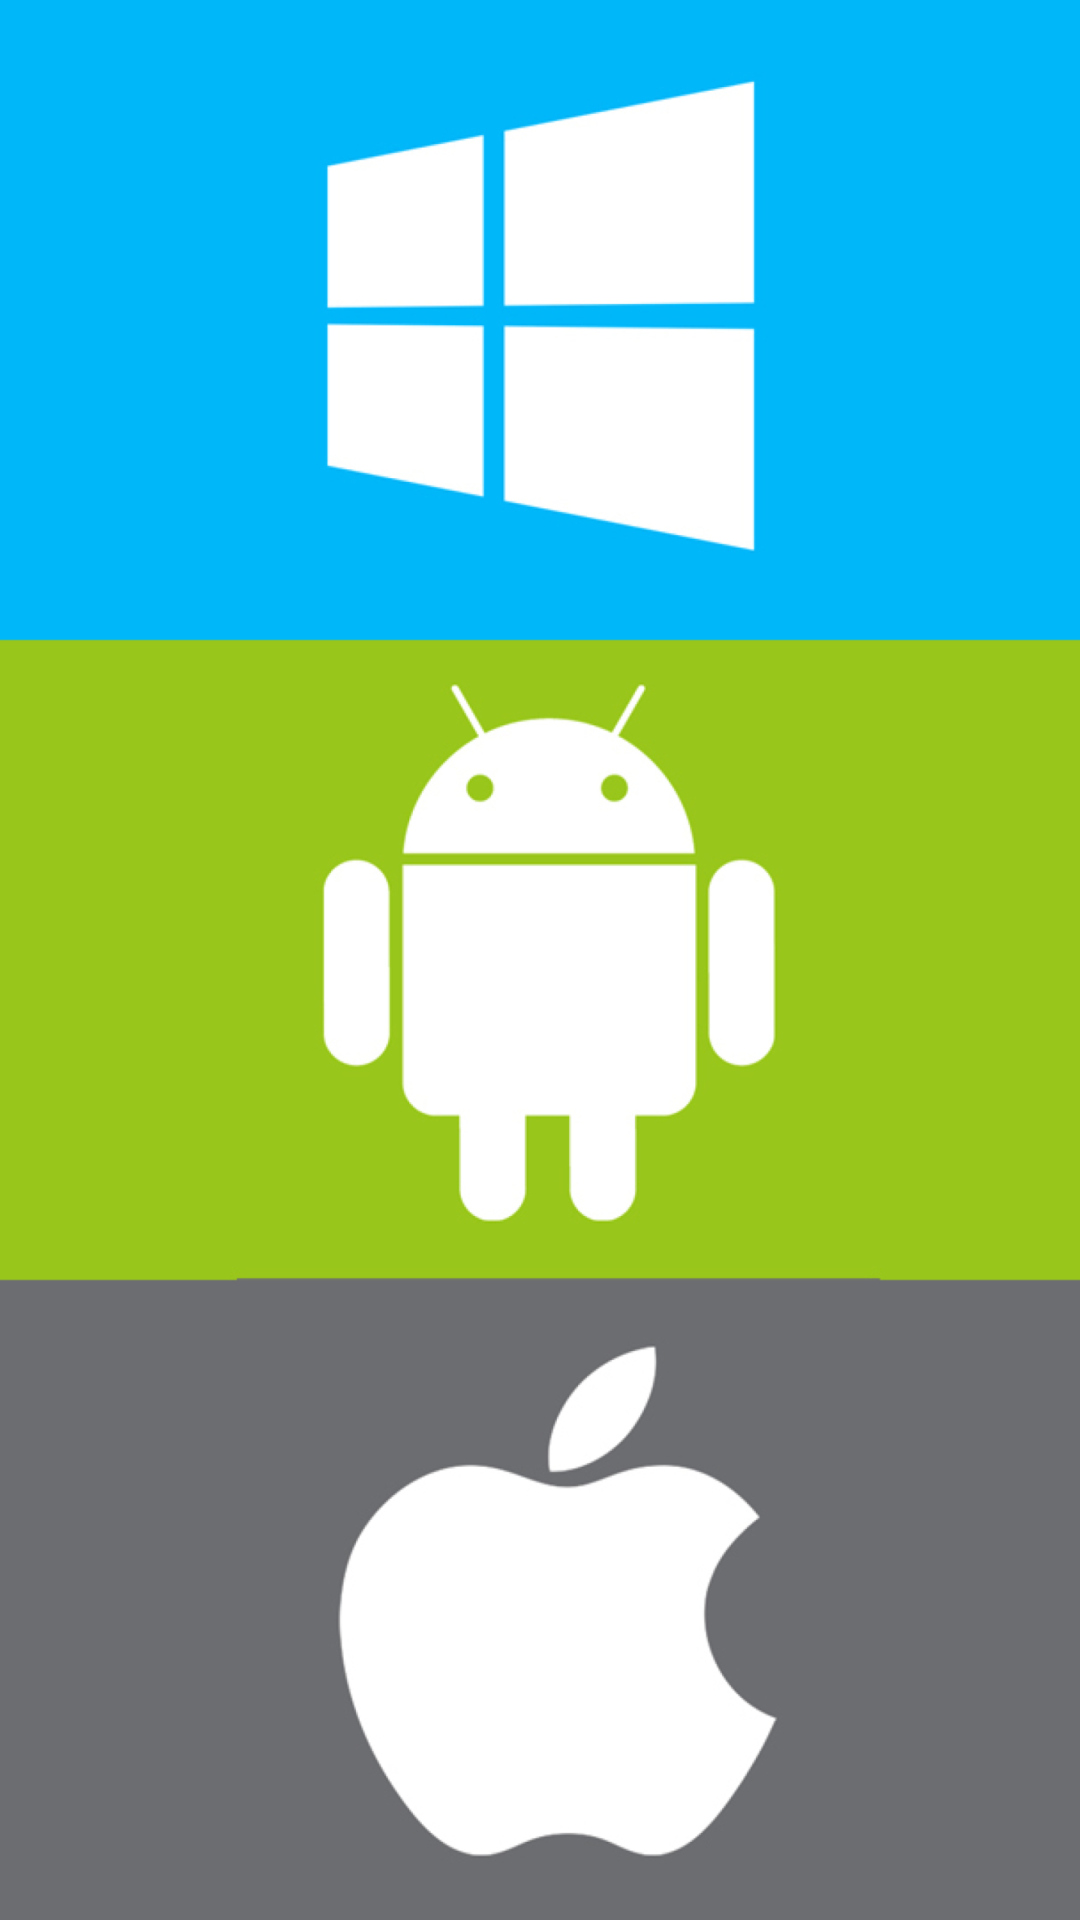 Windows, Apple, Android - What's Your Choice? wallpaper 1080x1920